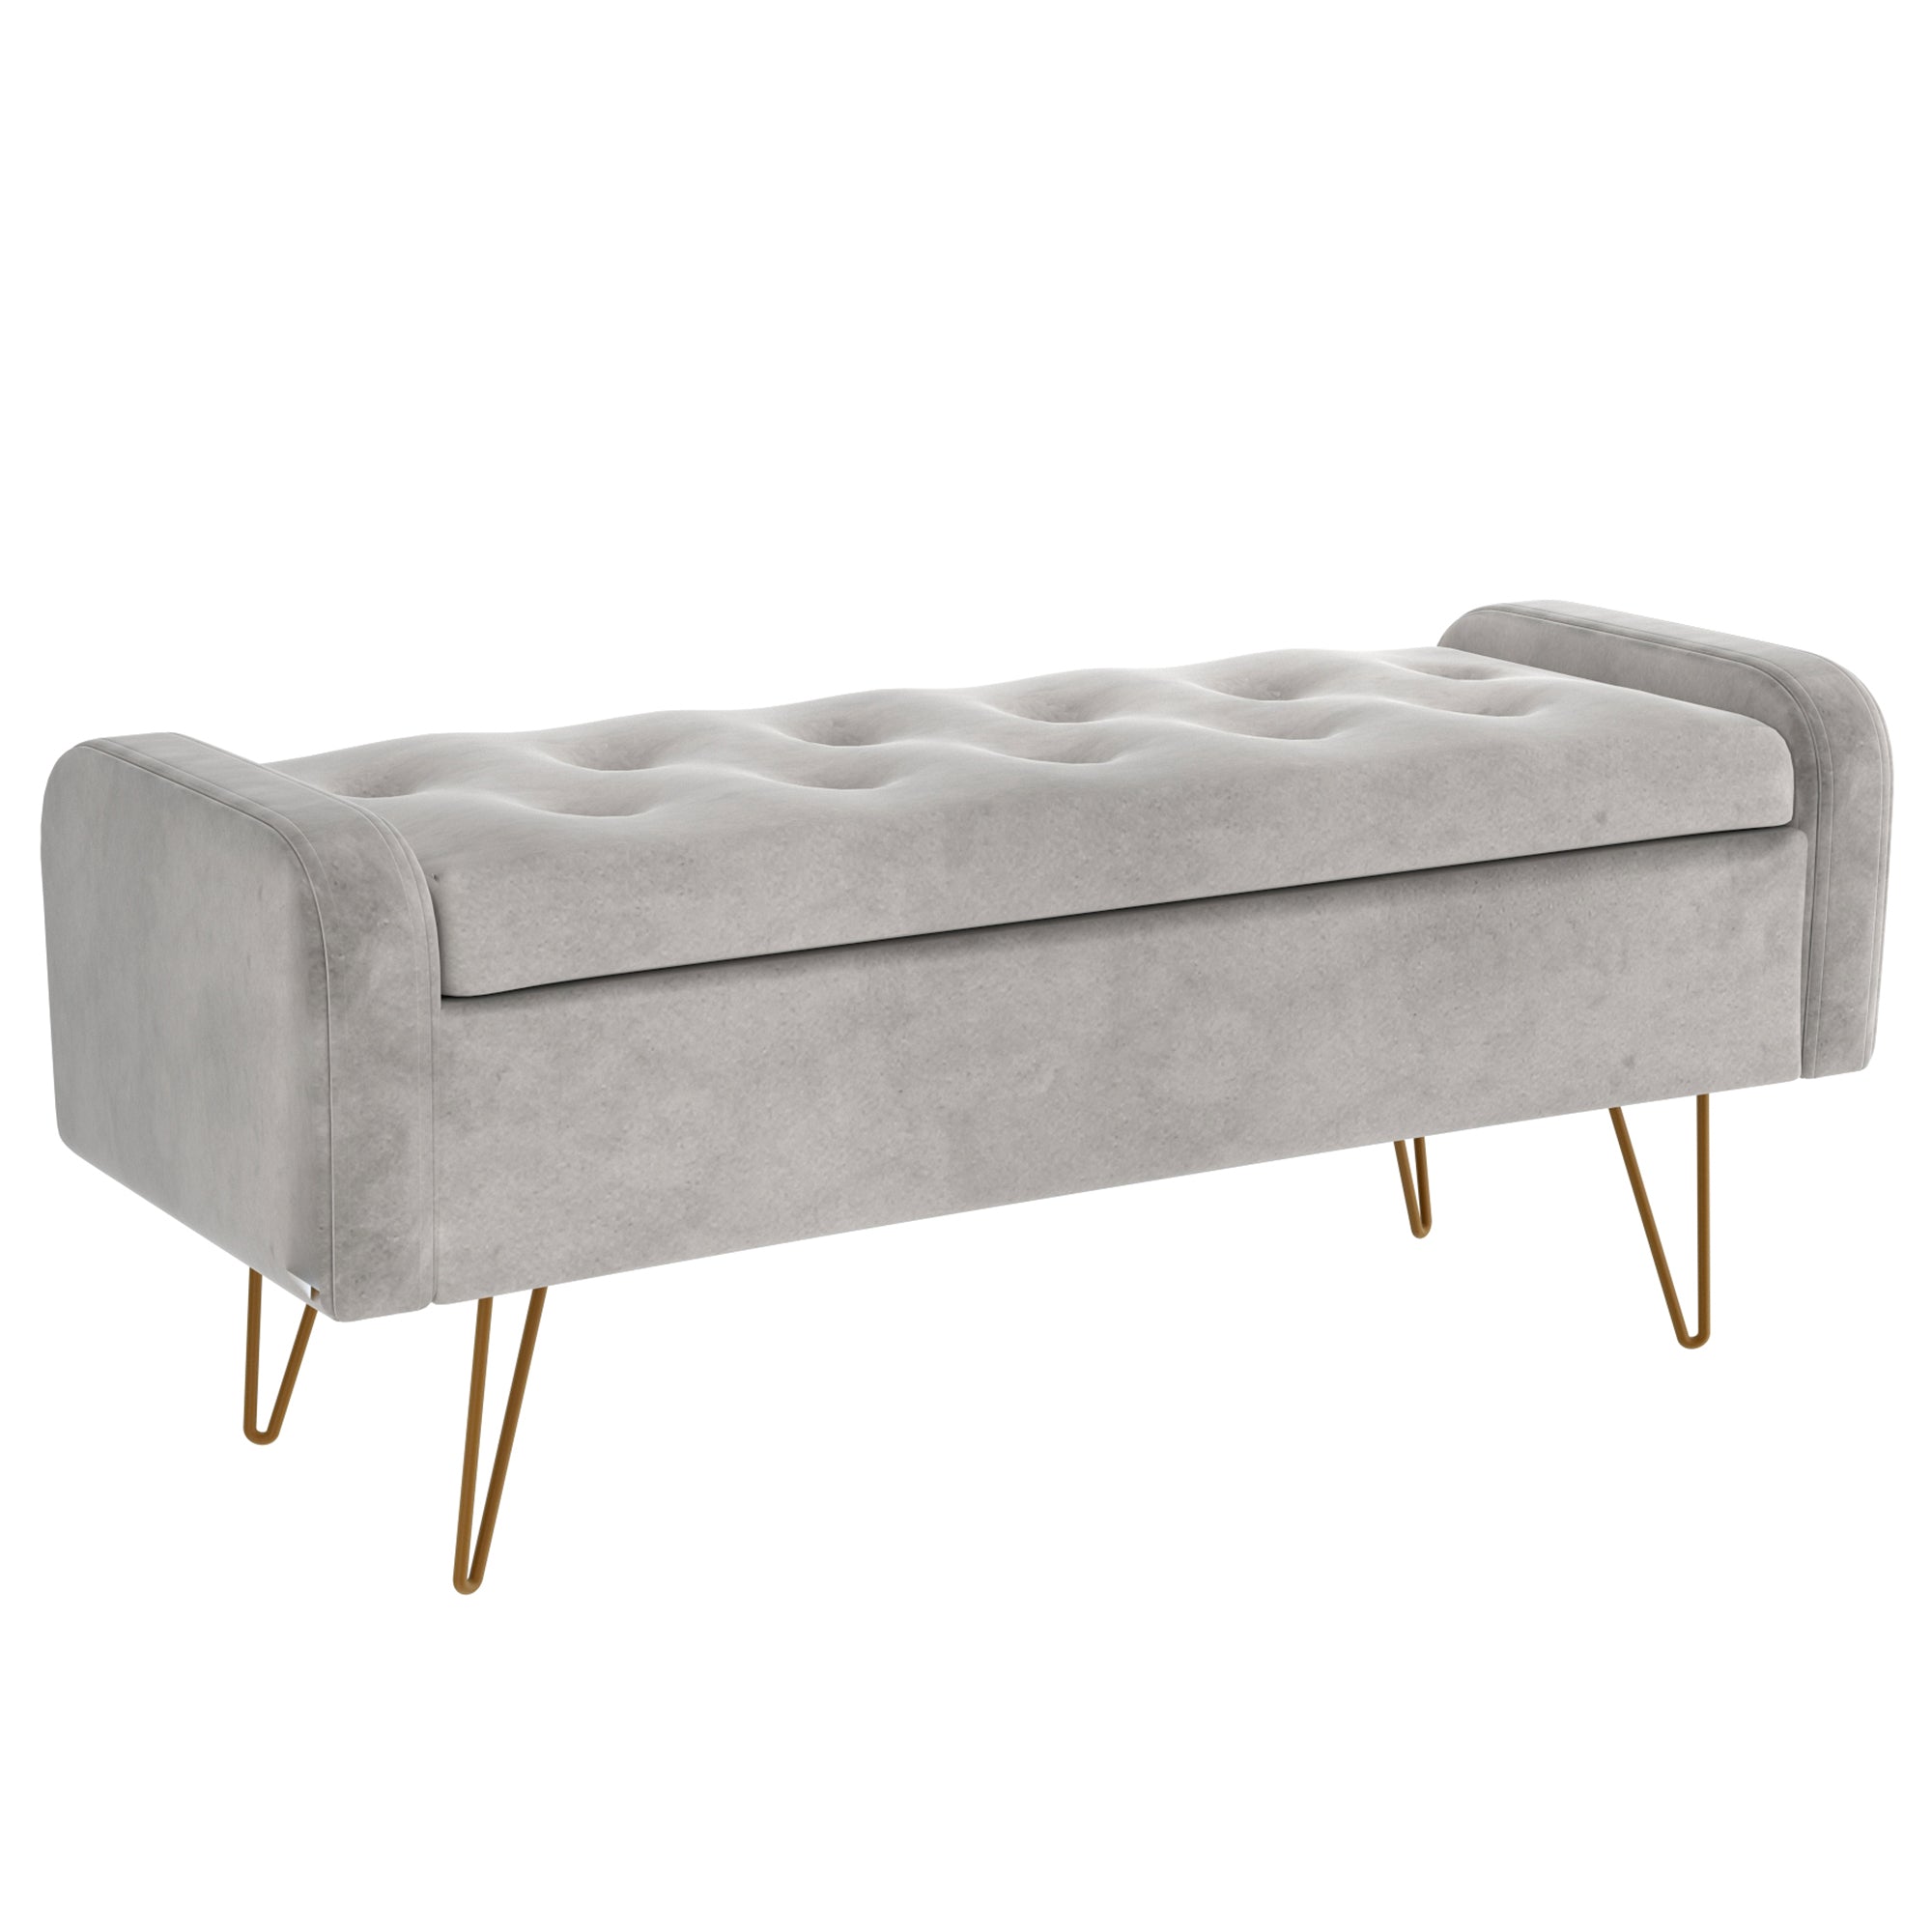 Sabel Storage Ottoman/Bench in Grey and Aged Gold 402-549GRY/GL